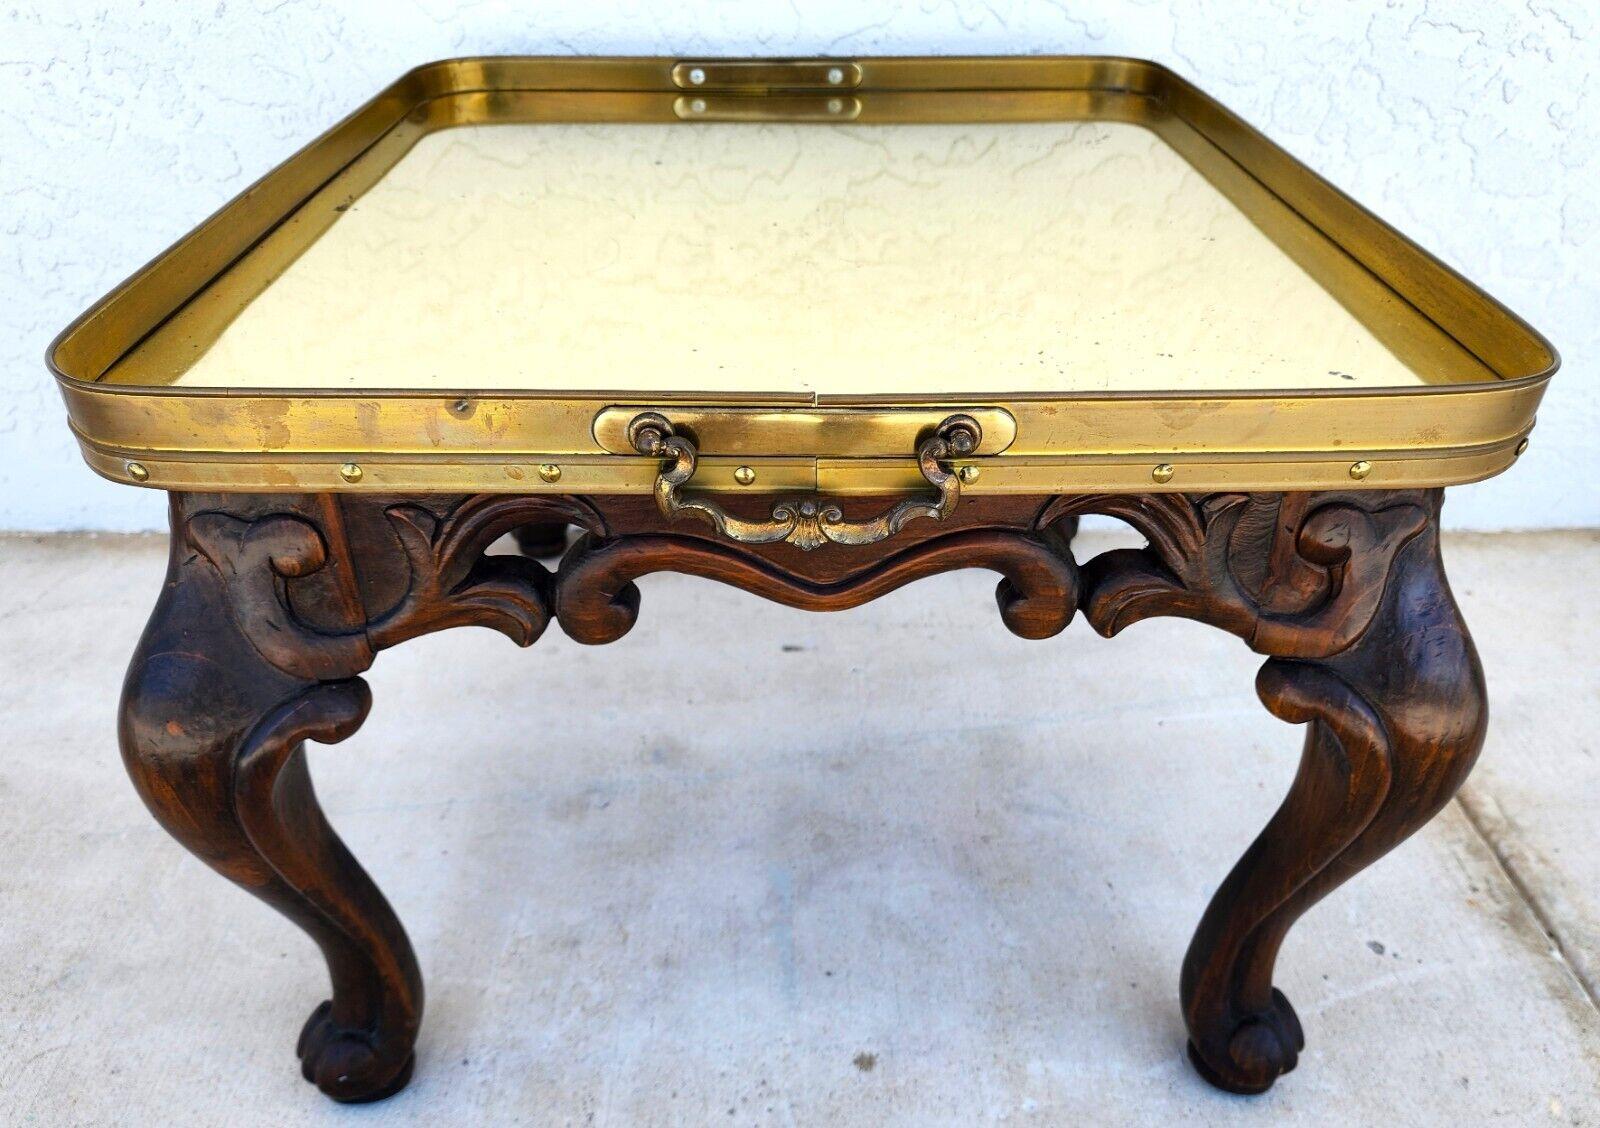 For FULL item description click on CONTINUE READING at the bottom of this page.

For FULL item description click on CONTINUE READING at the bottom of this page.
Offering One Of Our Recent Palm Beach Estate Fine Furniture Acquisitions Of A